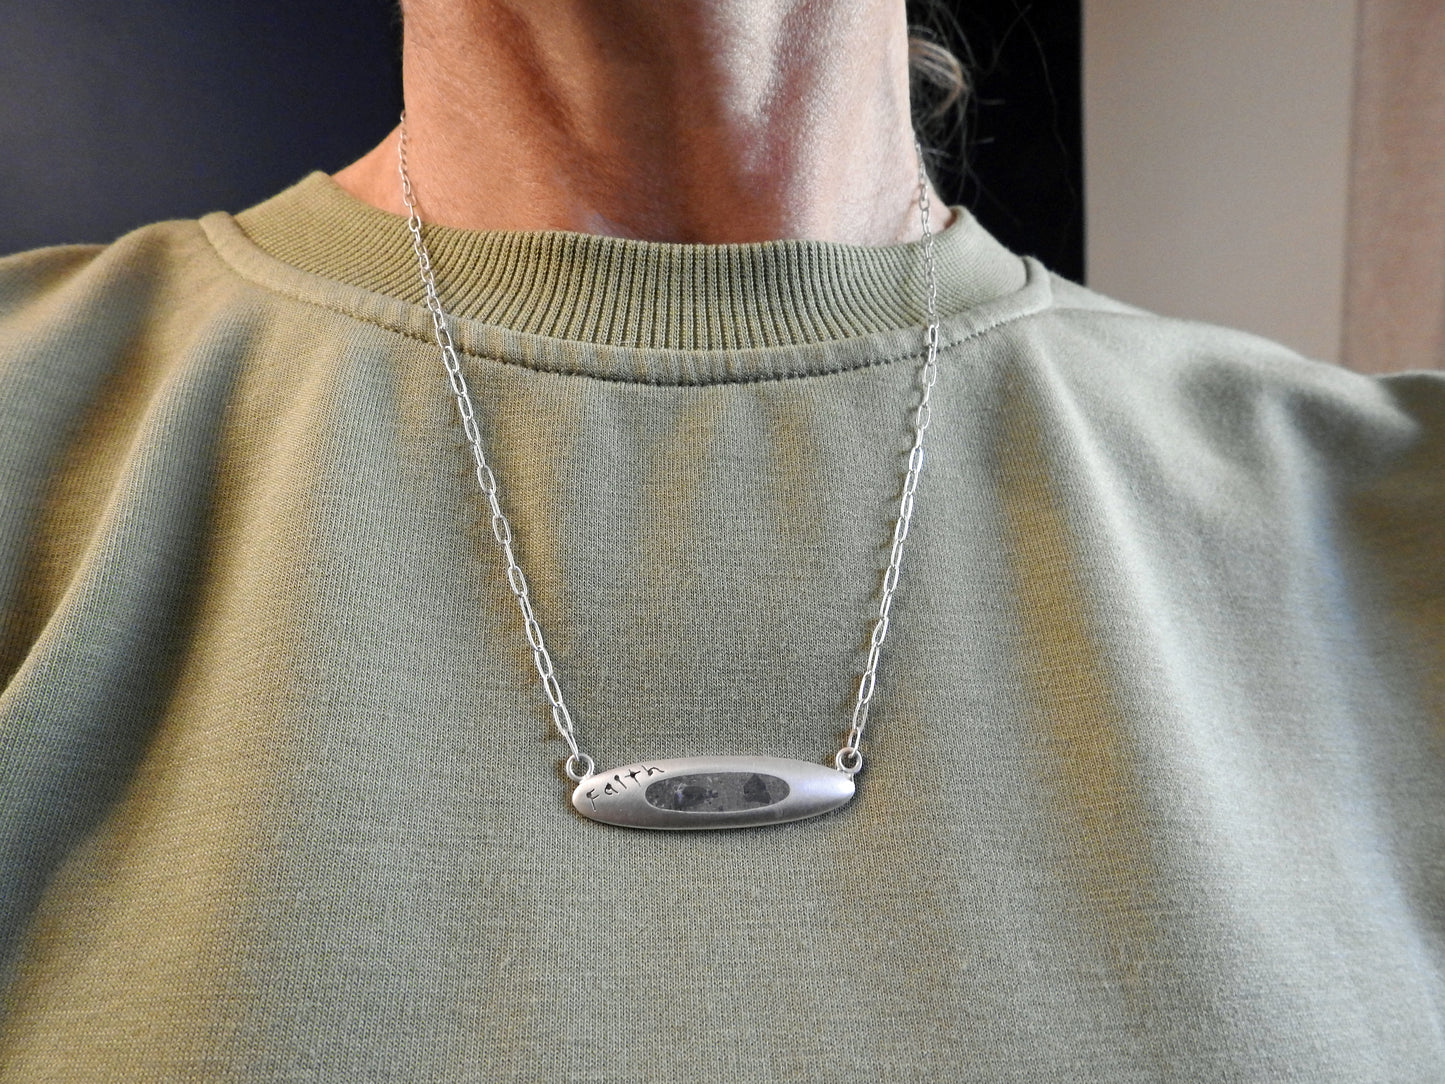 Faith, limestone inlay sterling silver pendant on elongated flat link chain, by ZEALmetal, Nicole Horlor, in Kingston, ON, Canada